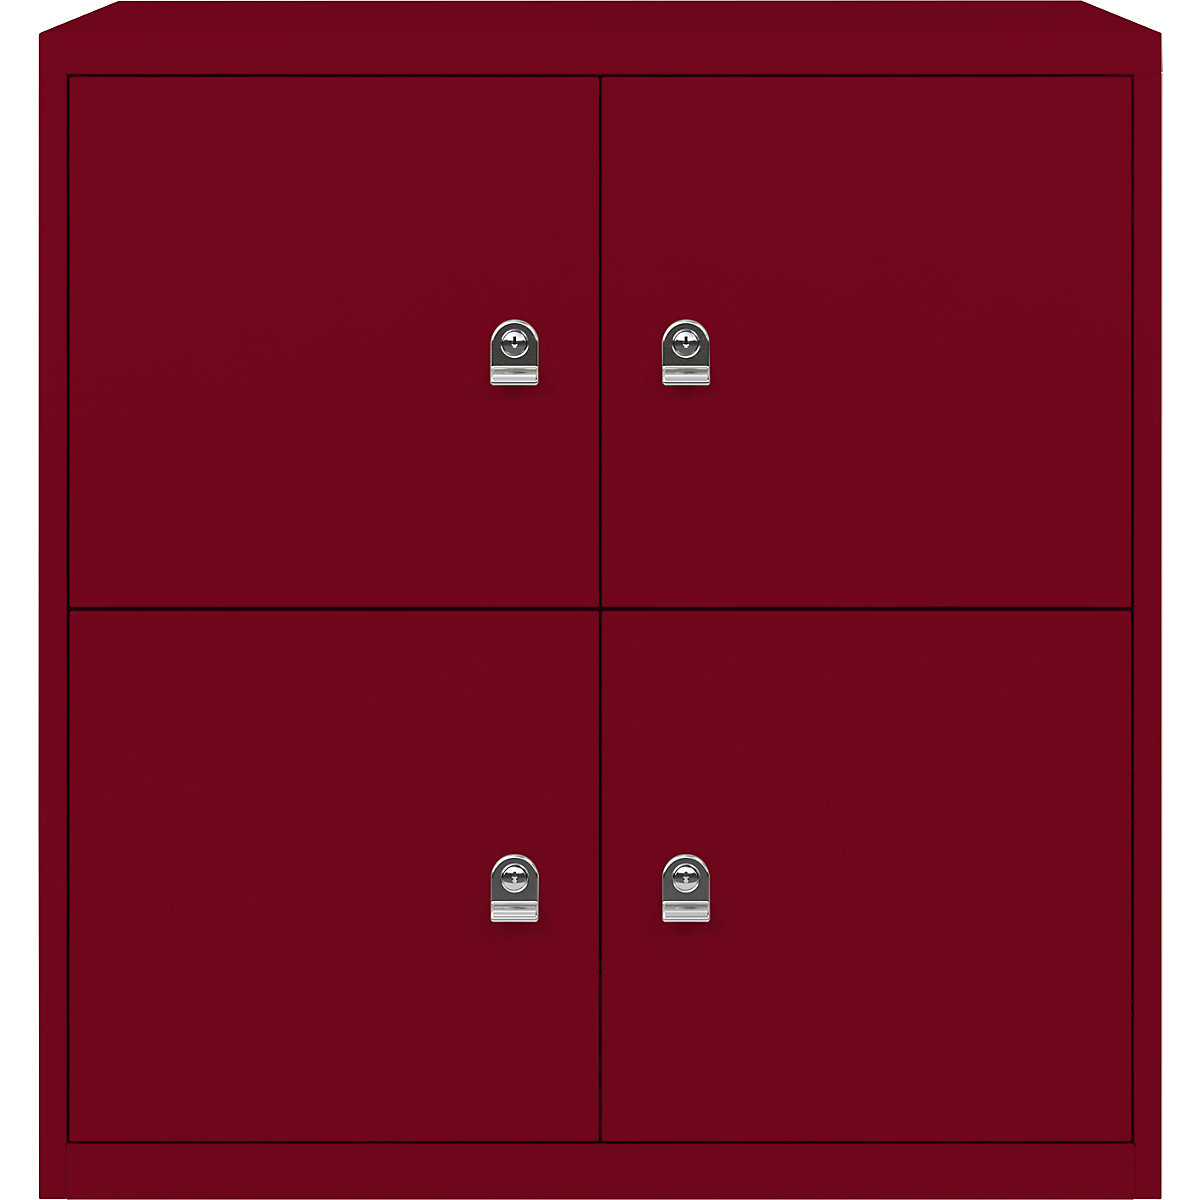 LateralFile™ lodge – BISLEY, with 4 lockable compartments, height 375 mm each, cardinal red